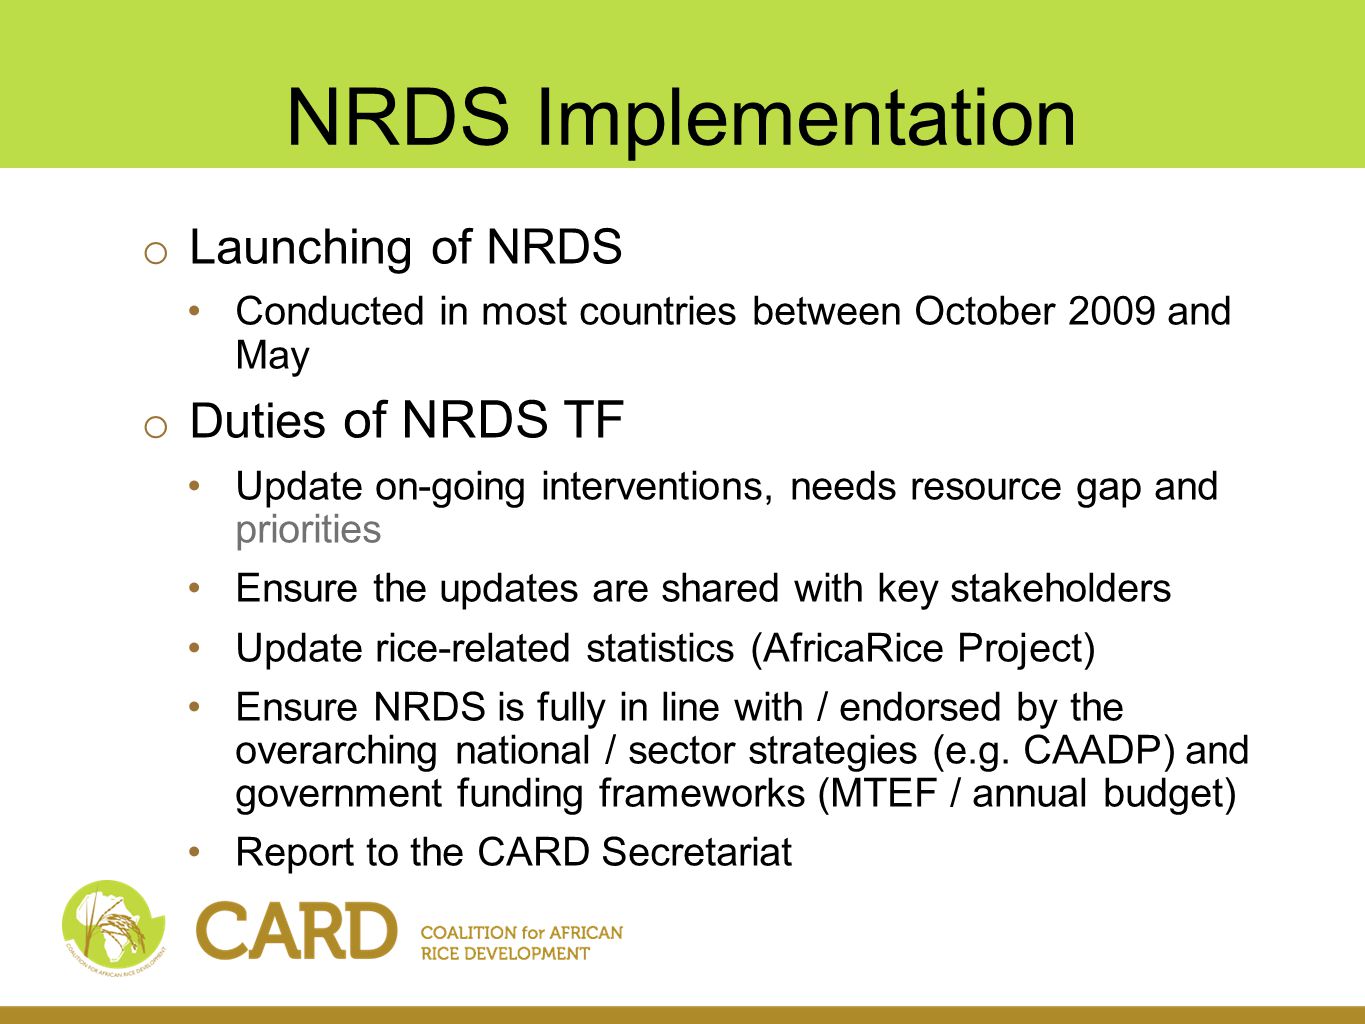 NRDS Implementation o Launching of NRDS Conducted in most countries between October 2009 and May o Duties of NRDS TF Update on-going interventions, needs resource gap and priorities Ensure the updates are shared with key stakeholders Update rice-related statistics (AfricaRice Project) Ensure NRDS is fully in line with / endorsed by the overarching national / sector strategies (e.g.